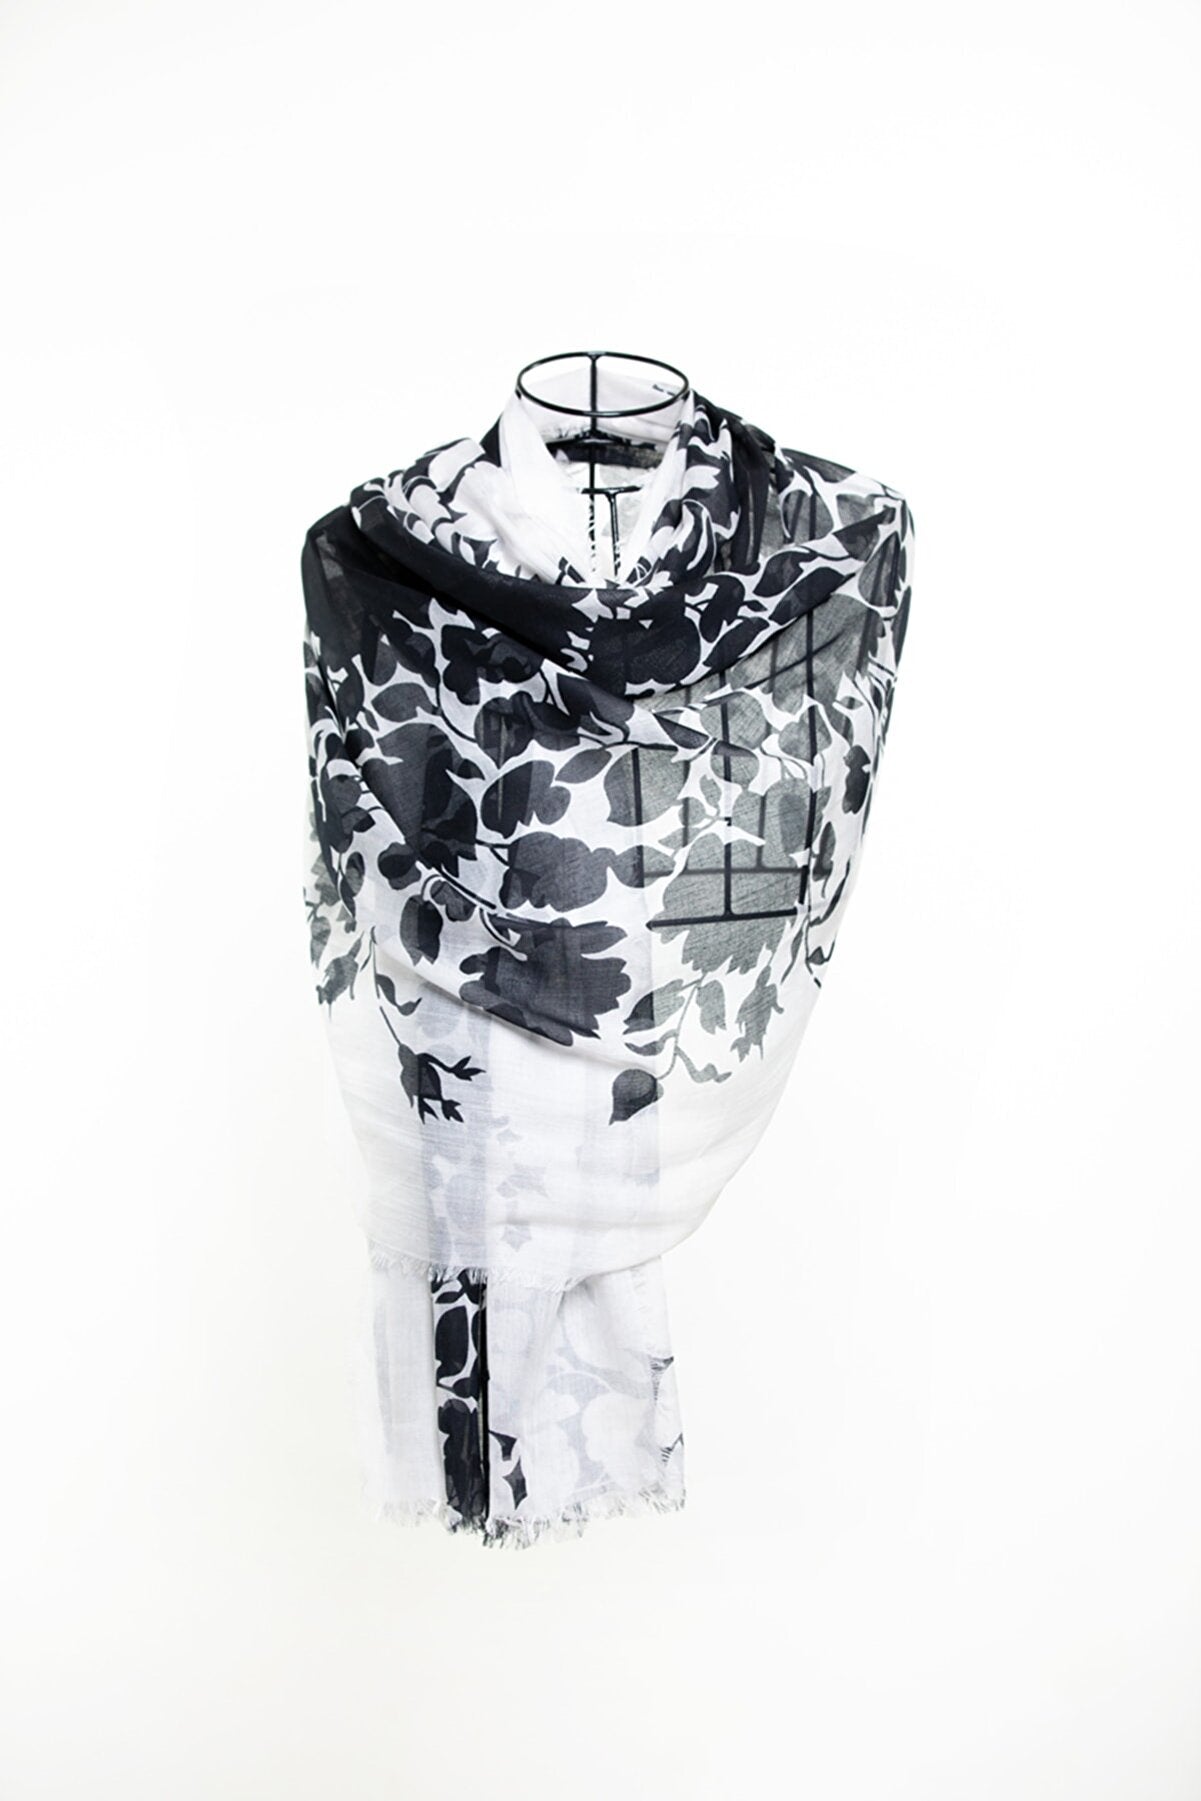 Rosa Abstract Sheer Lightweight Modal Floral Scarf - Black and White